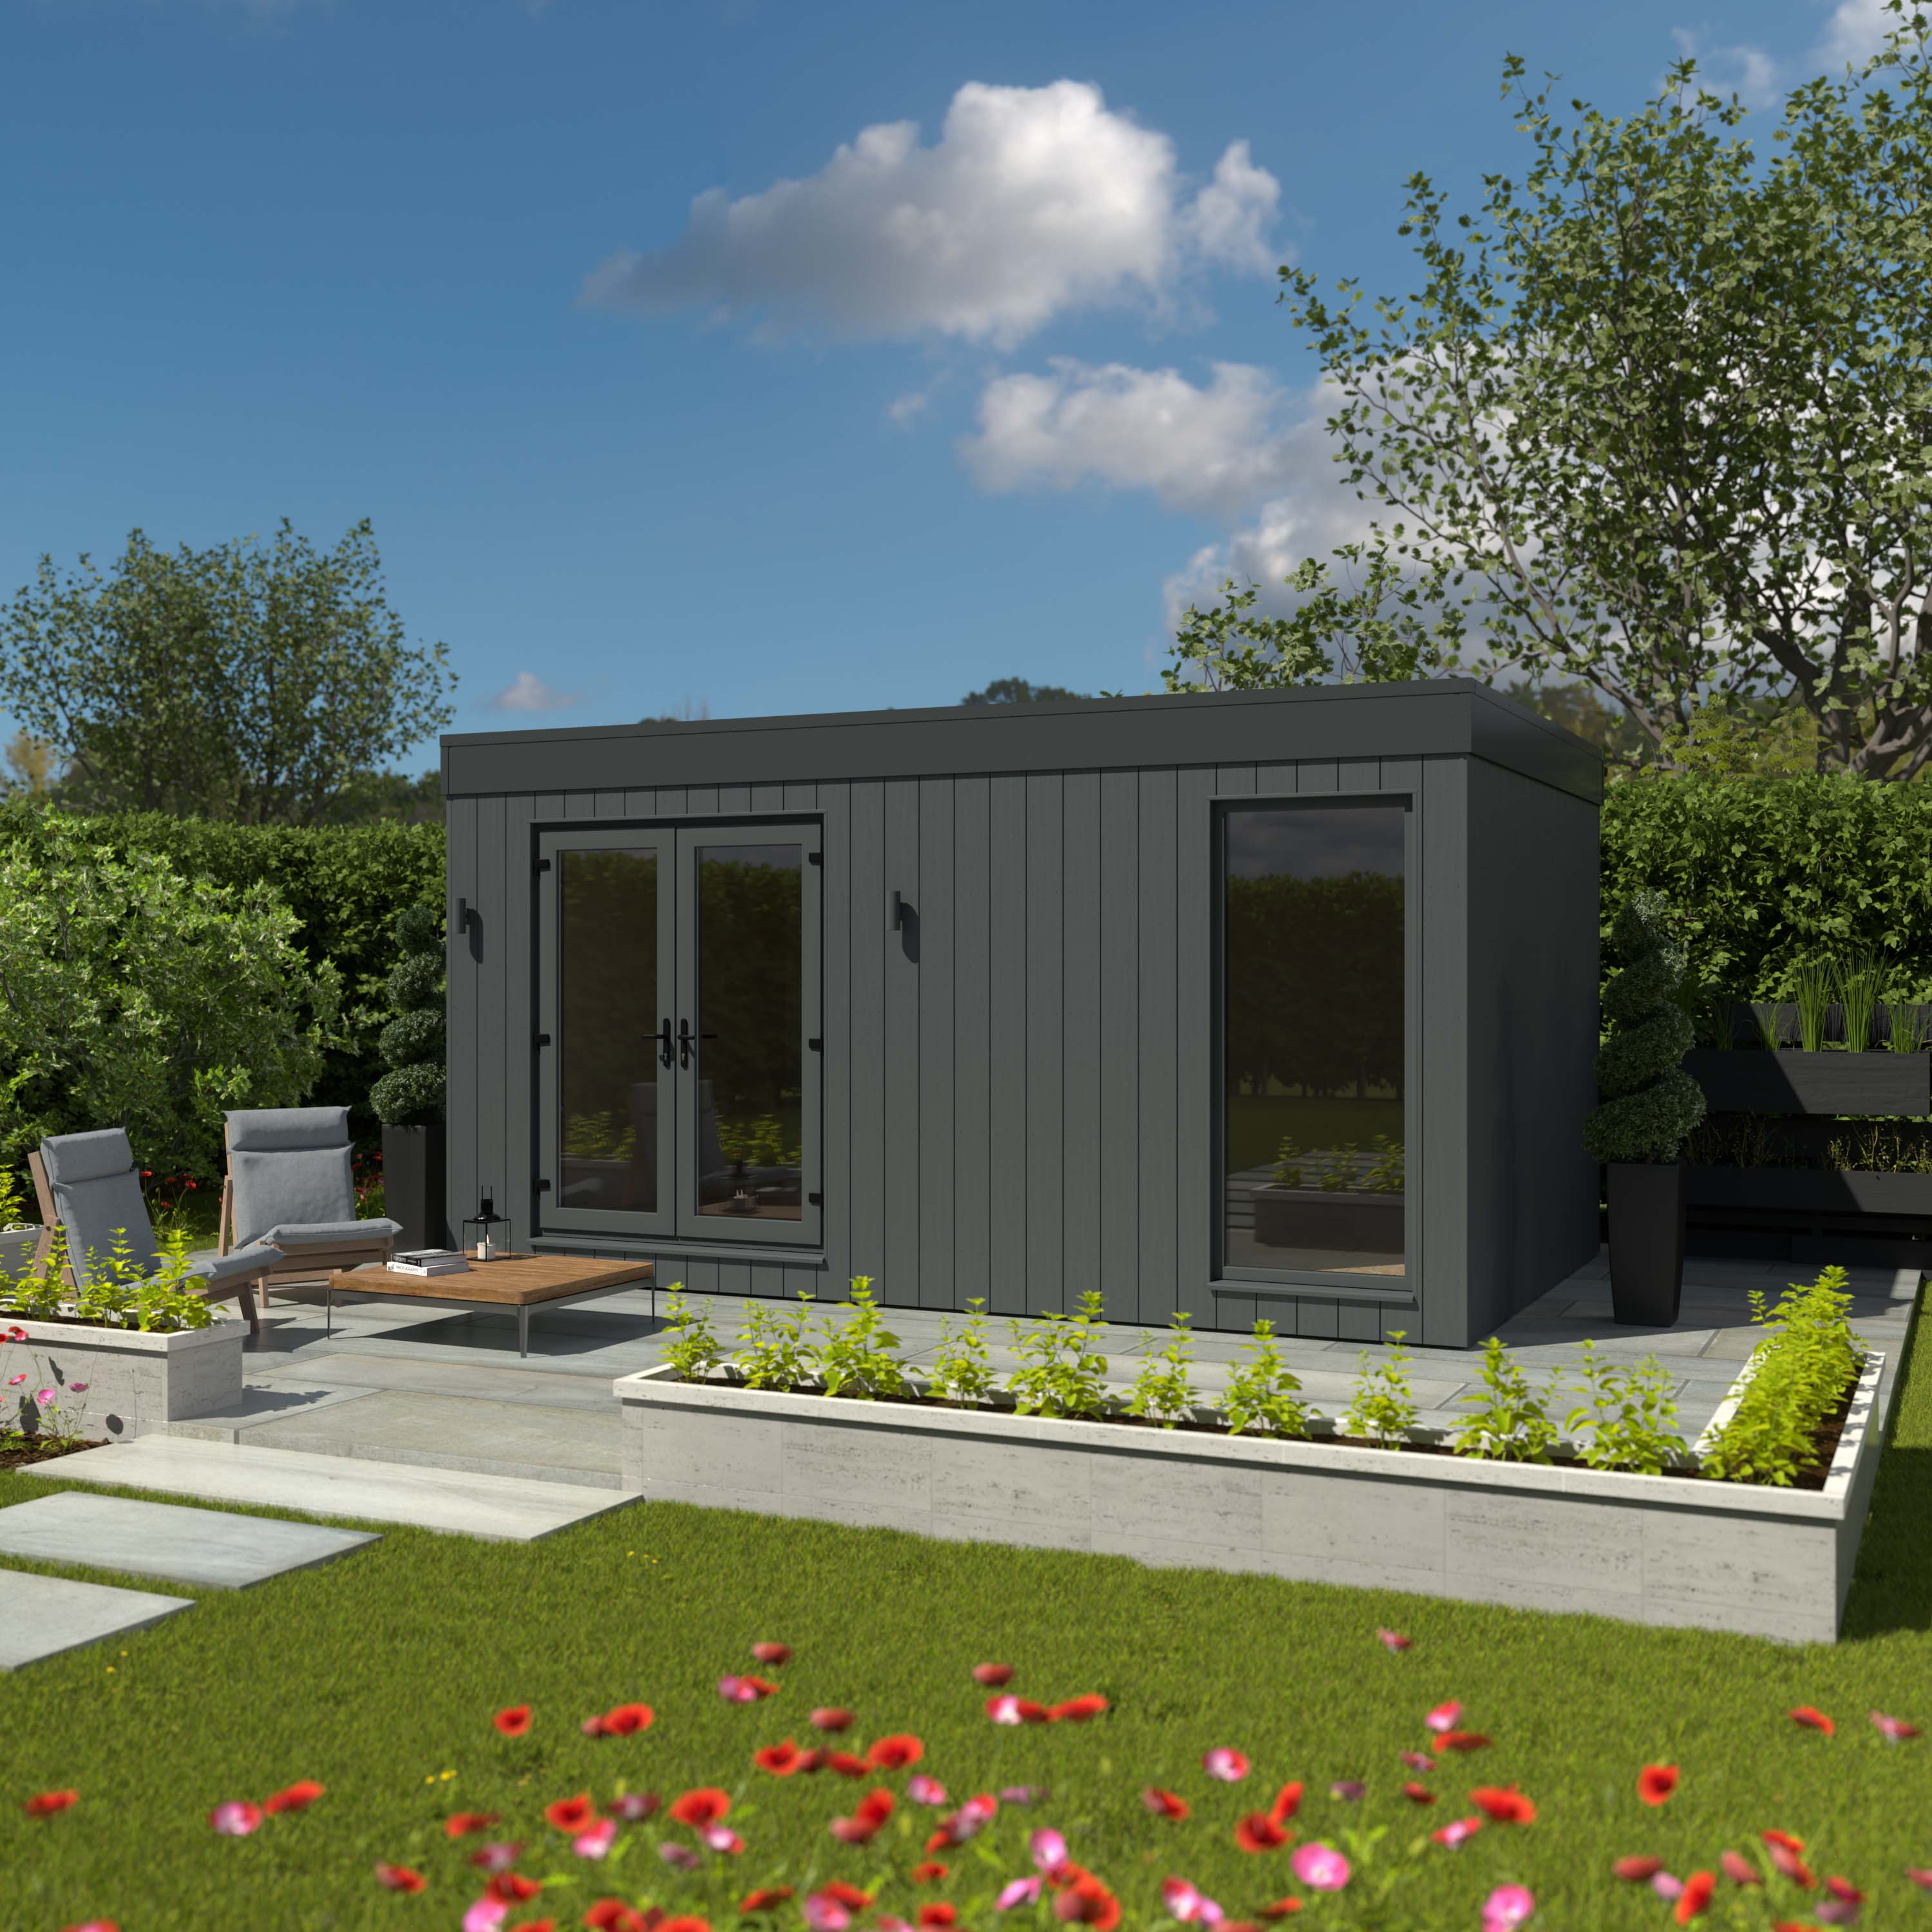 Image of Kyube Plus 5.2 x 3.3m Premium Composite Vertically Cladded Garden Room including Installation - Anthracite Grey